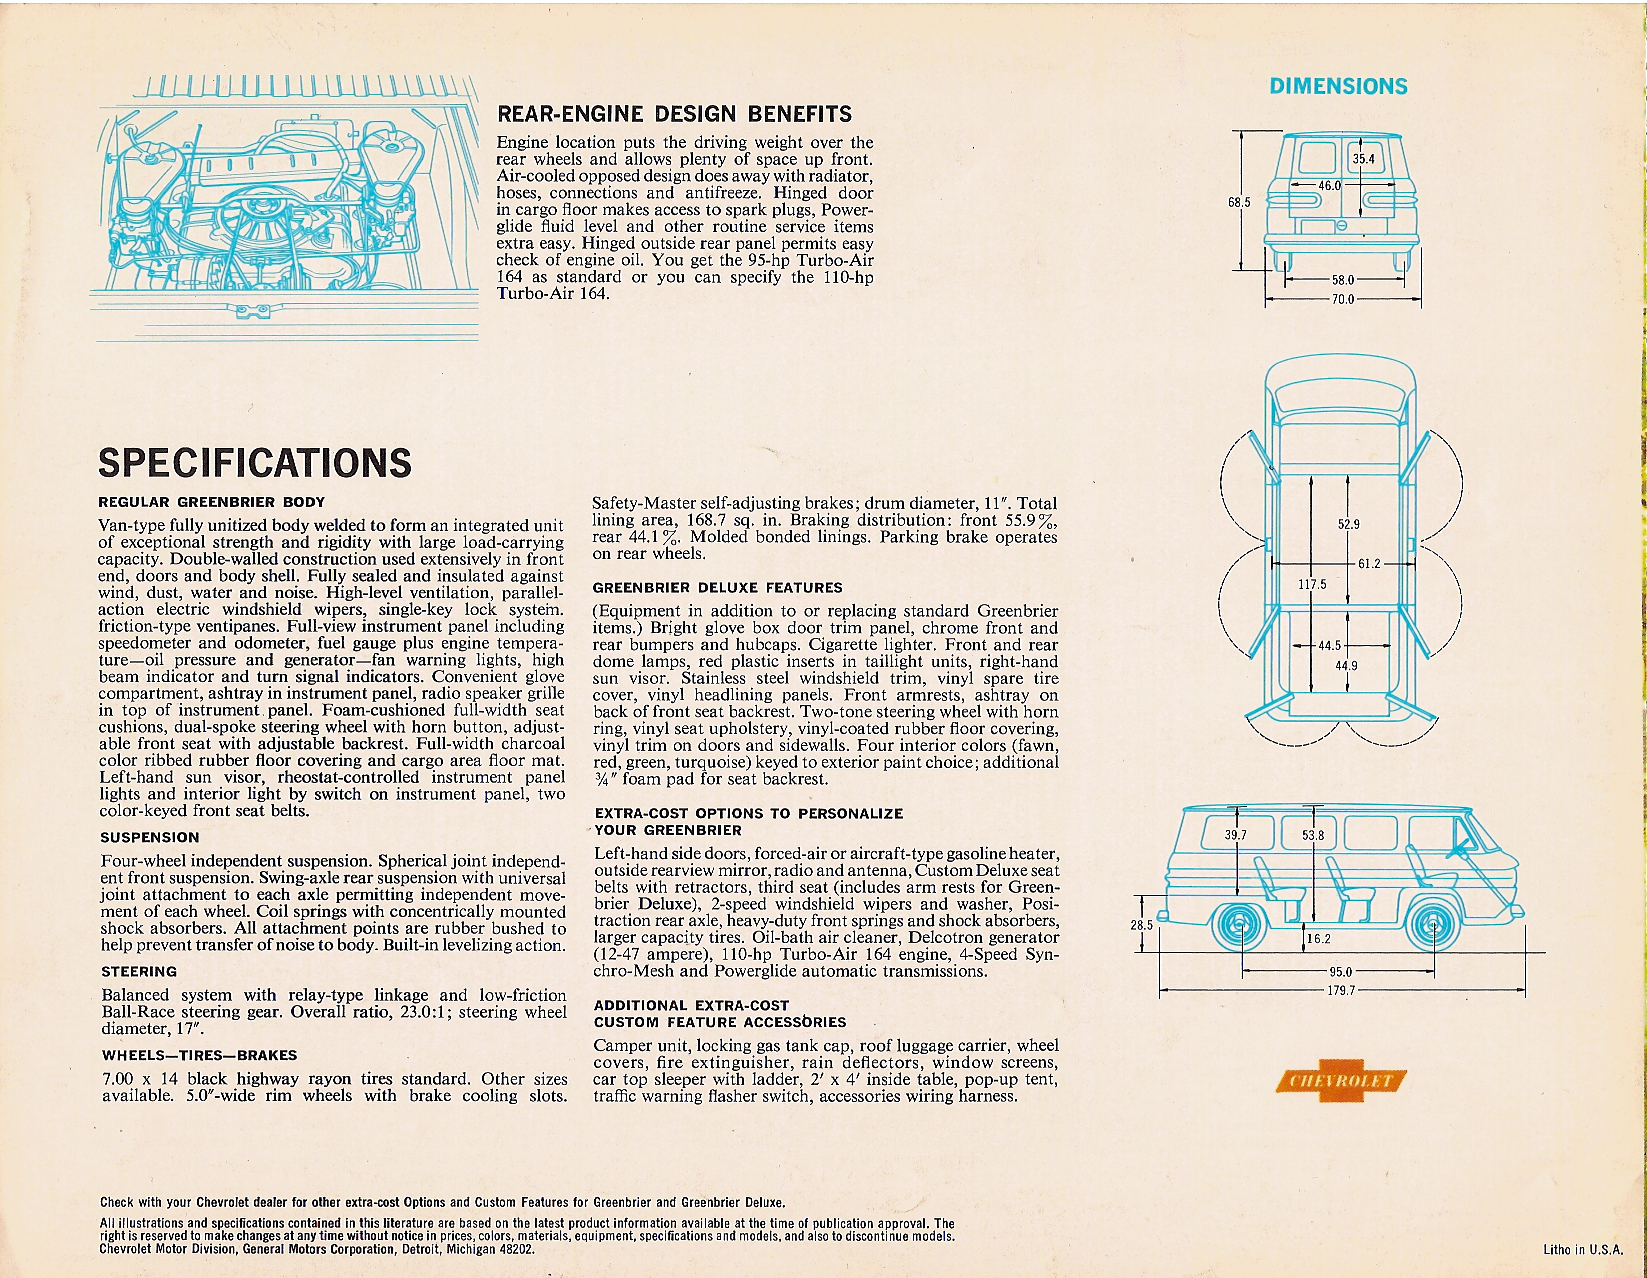 1965 Chevrolet Corvair Greenbrier Truck Brochure Page 4